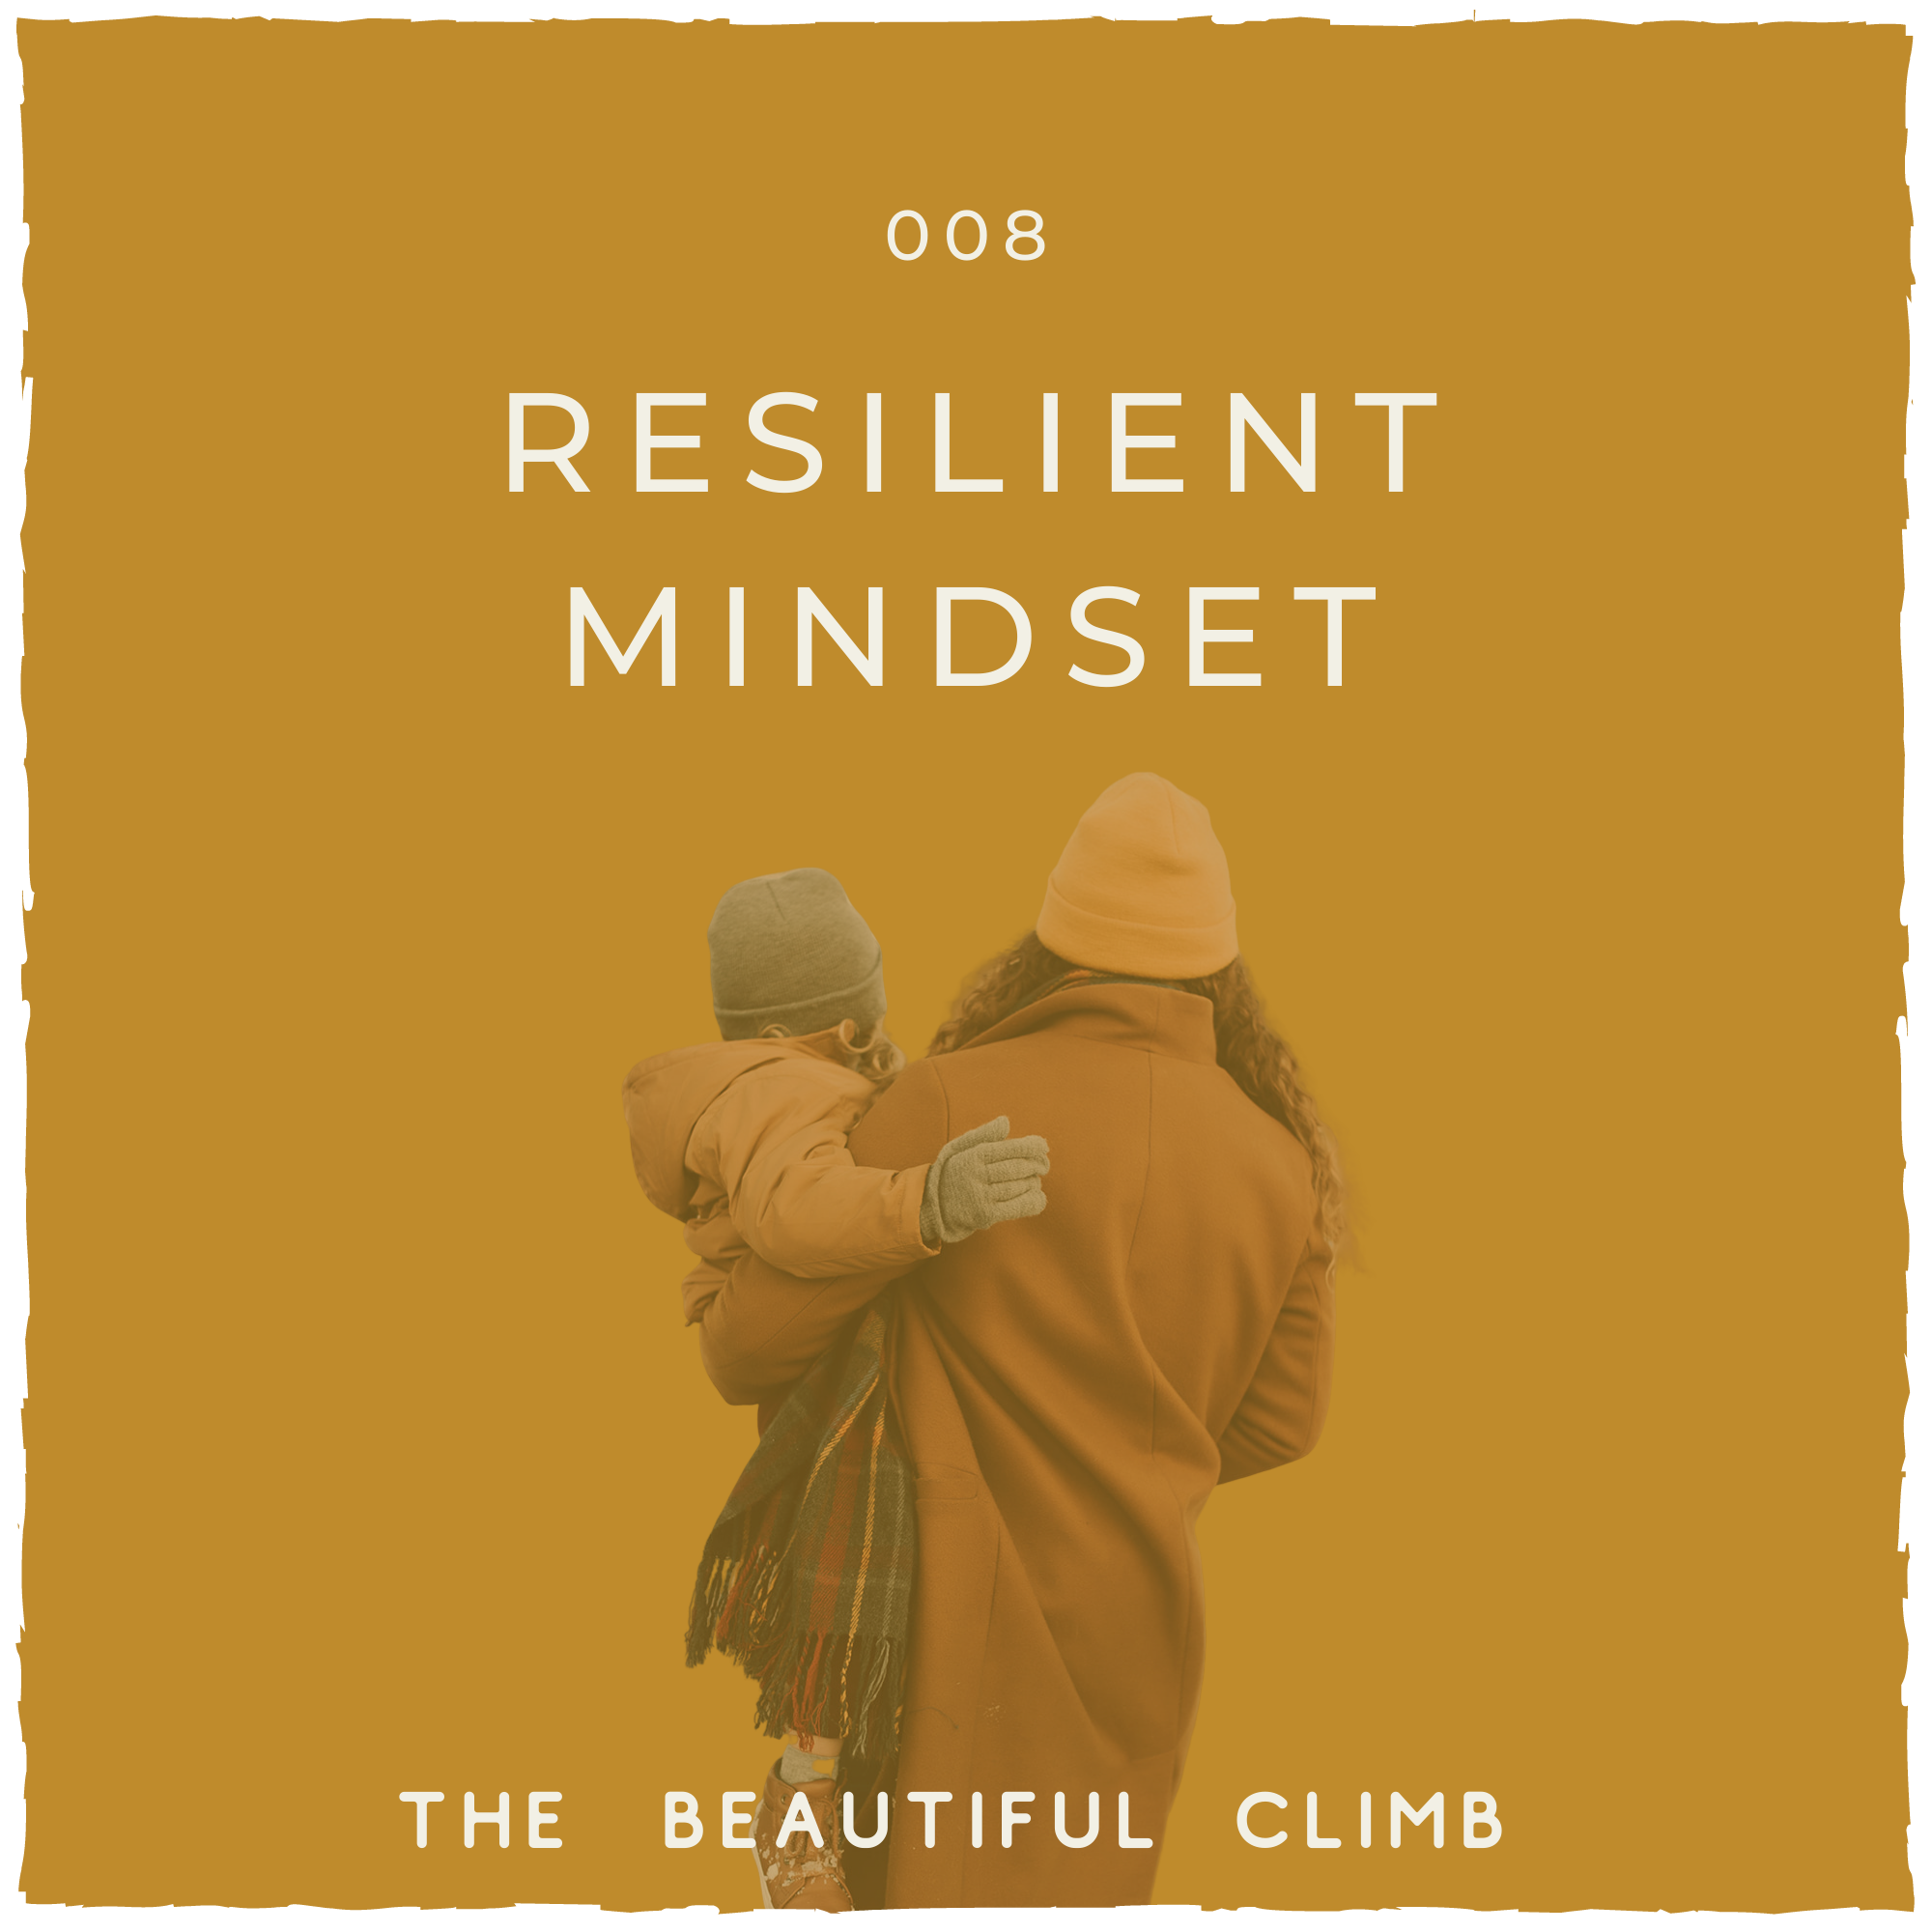 Mindset has been an ongoing journey for me as a mother and entrepreneur, but without a resilient mindset, life can really throw you off your horse. On today's episode of The Beautiful Climb Podcast, Resilient Mindset, I'm sharing my daily mindset routine that contributes to my resilient mindset no matter what life may throw my way, how to recognize and honor the seasons in your life so you can become more productive, creative and successful and the #1 excuse I see women using #mindsettips #mindsetroutine | Michelle Knight Co.